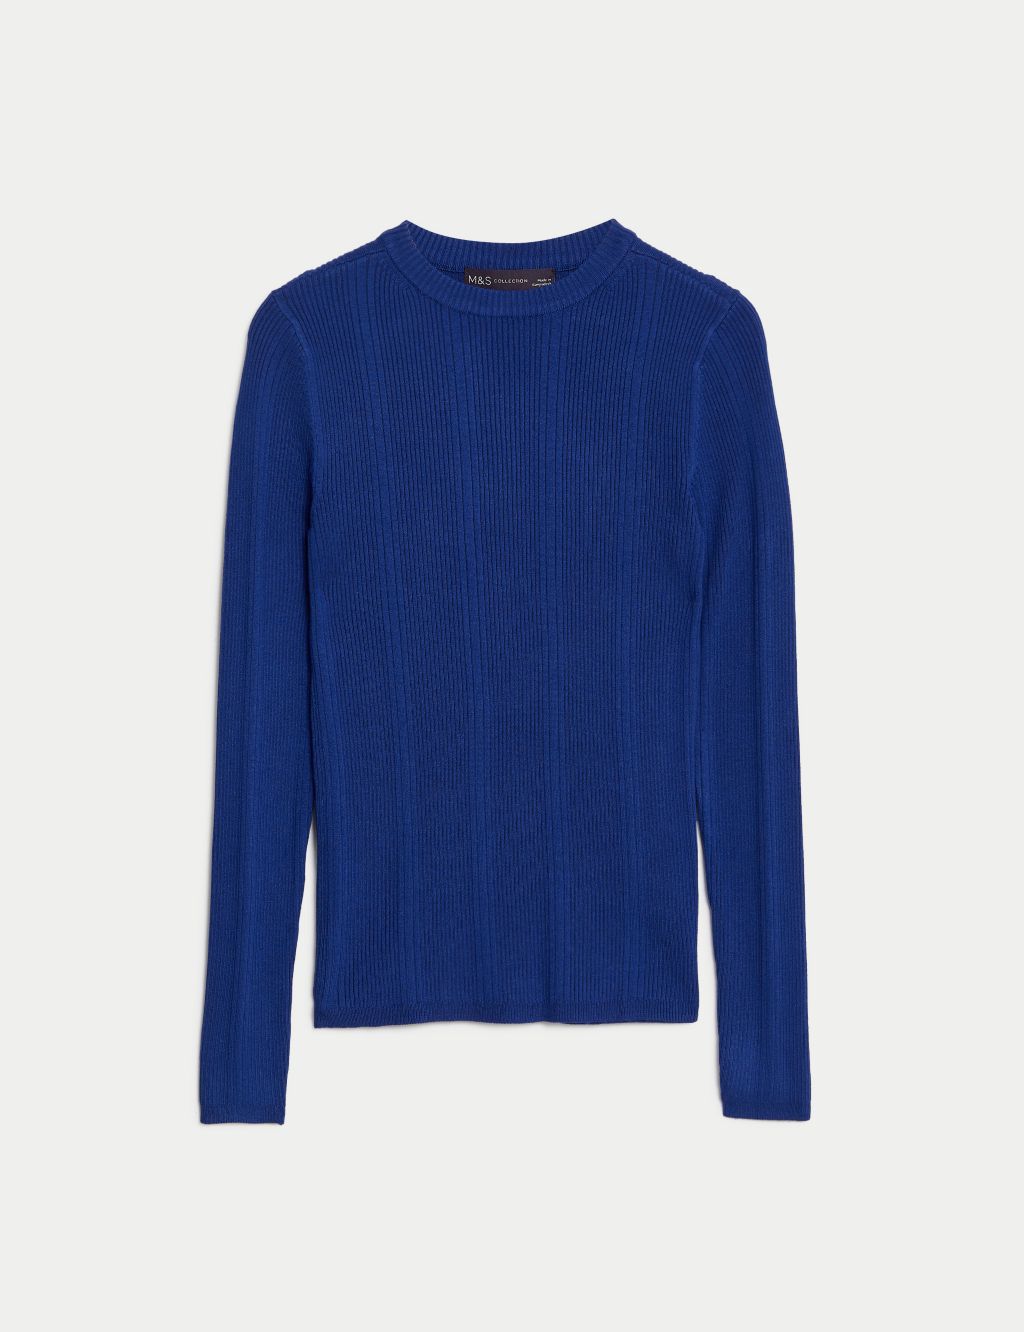 Ribbed Crew Neck Fitted Knitted Top image 2